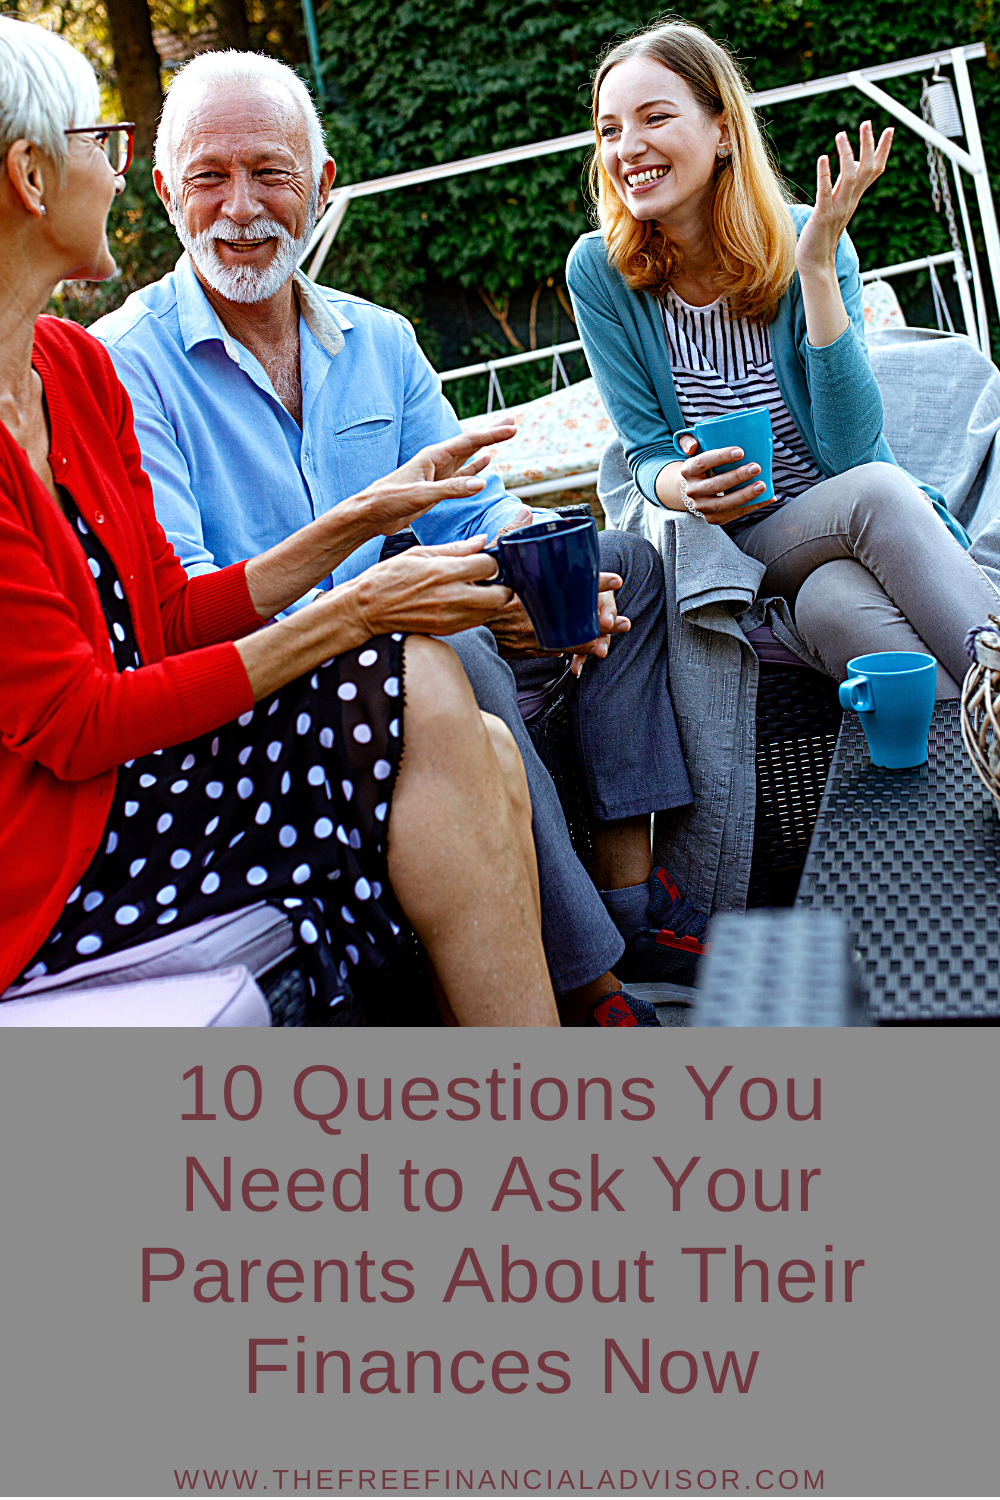 10 Questions You Need to Ask Your Parents About Their Finances Now